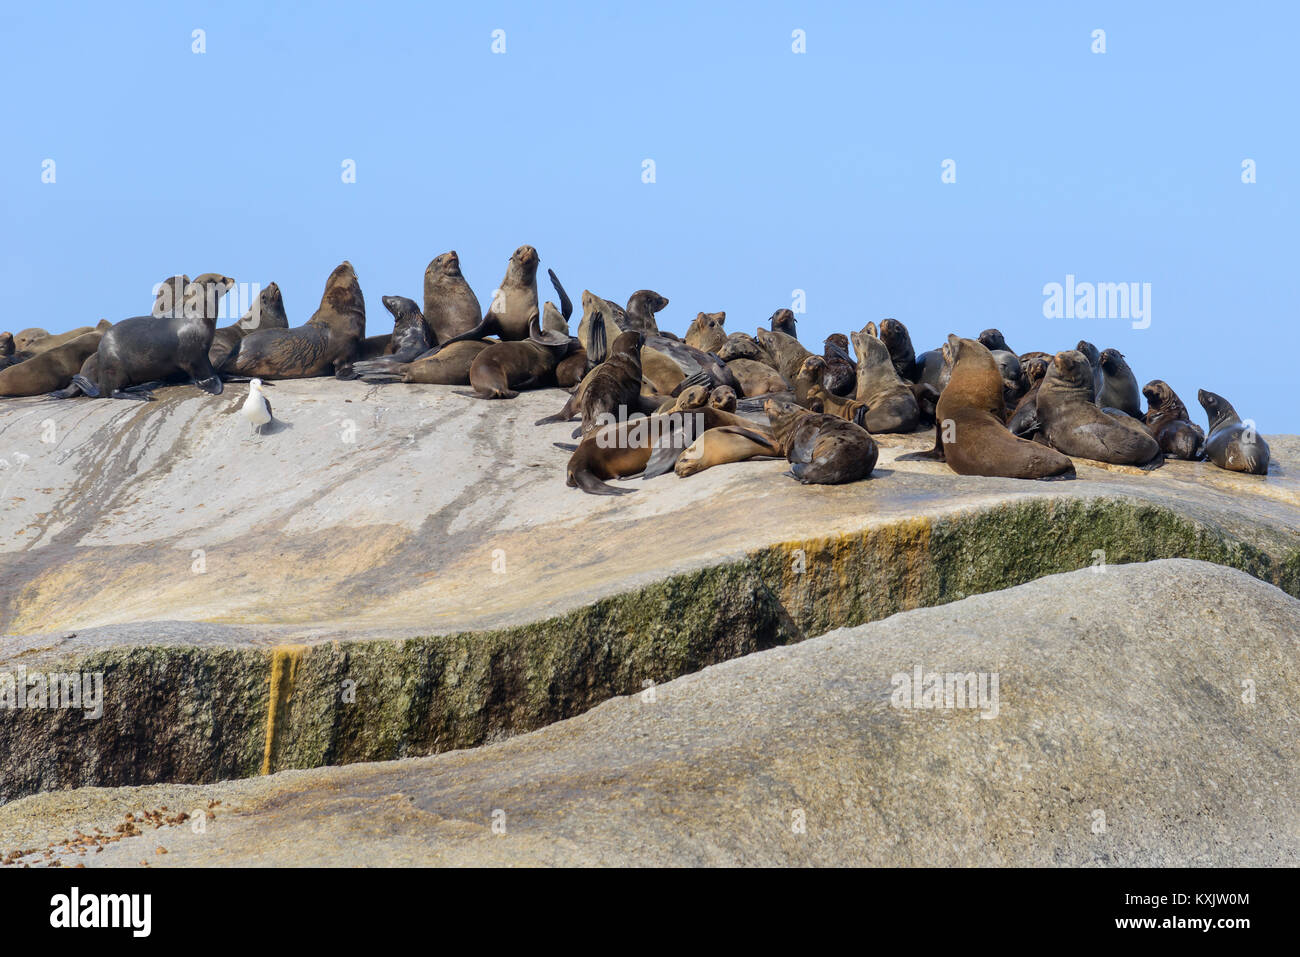 South African fur seal, Colony of Seals on cliff, Arctocephalus pusillus pusillus, False bay, Simons Town, South Africa, Indian Ocean Stock Photo